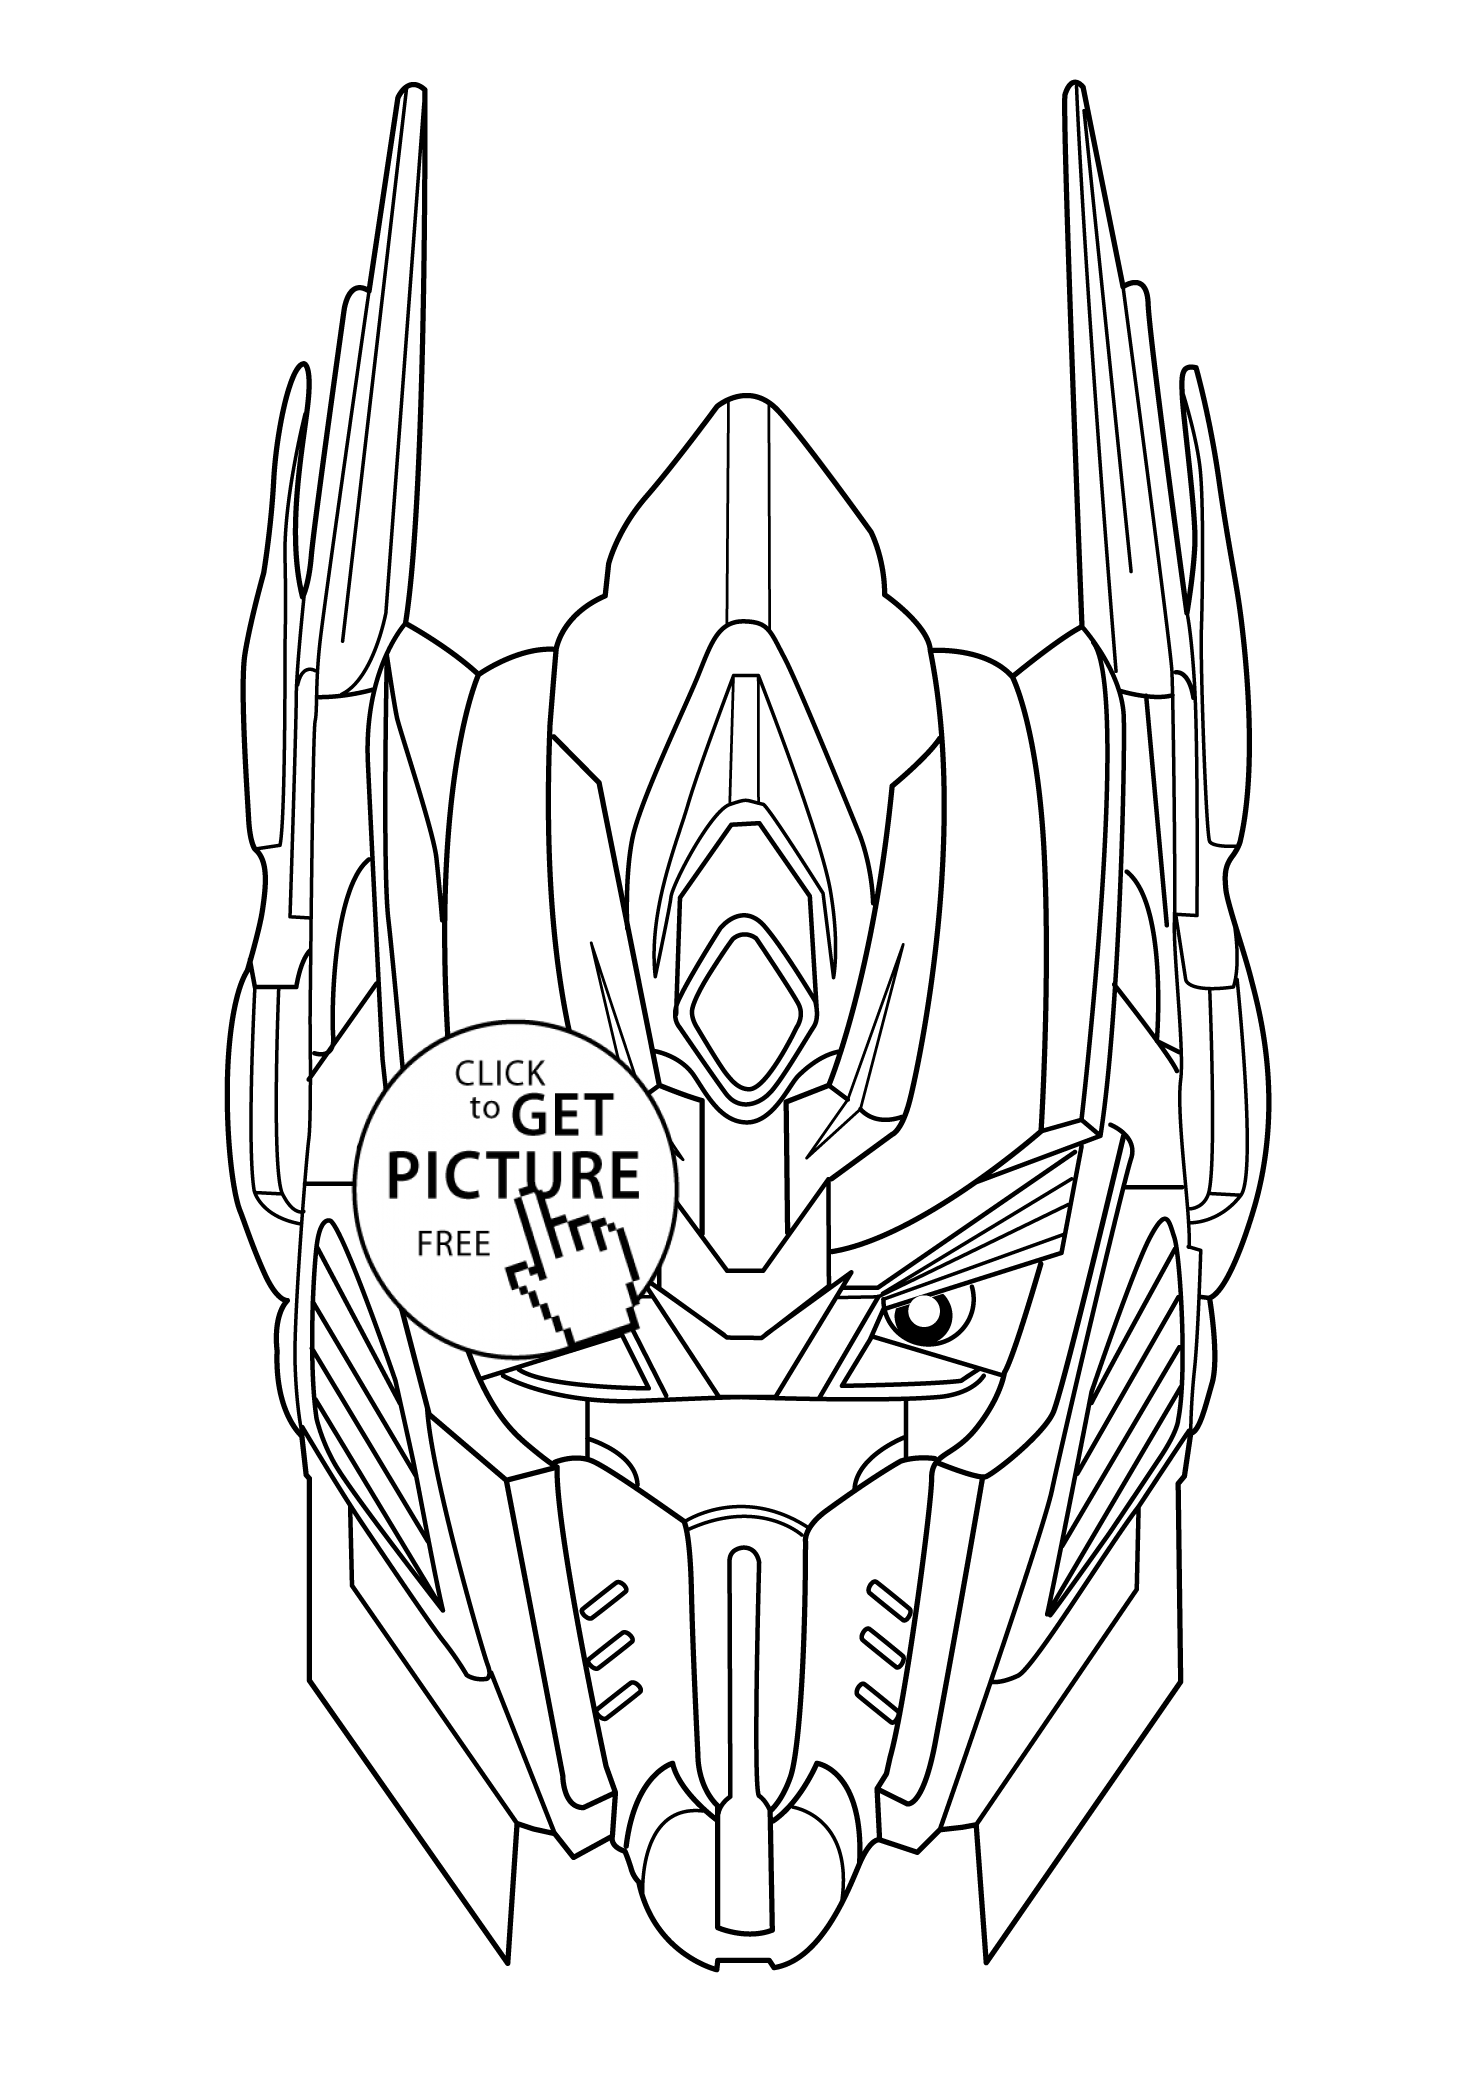 Transformers Grimlock Coloring Pages At GetColorings Free Printable Colorings Pages To